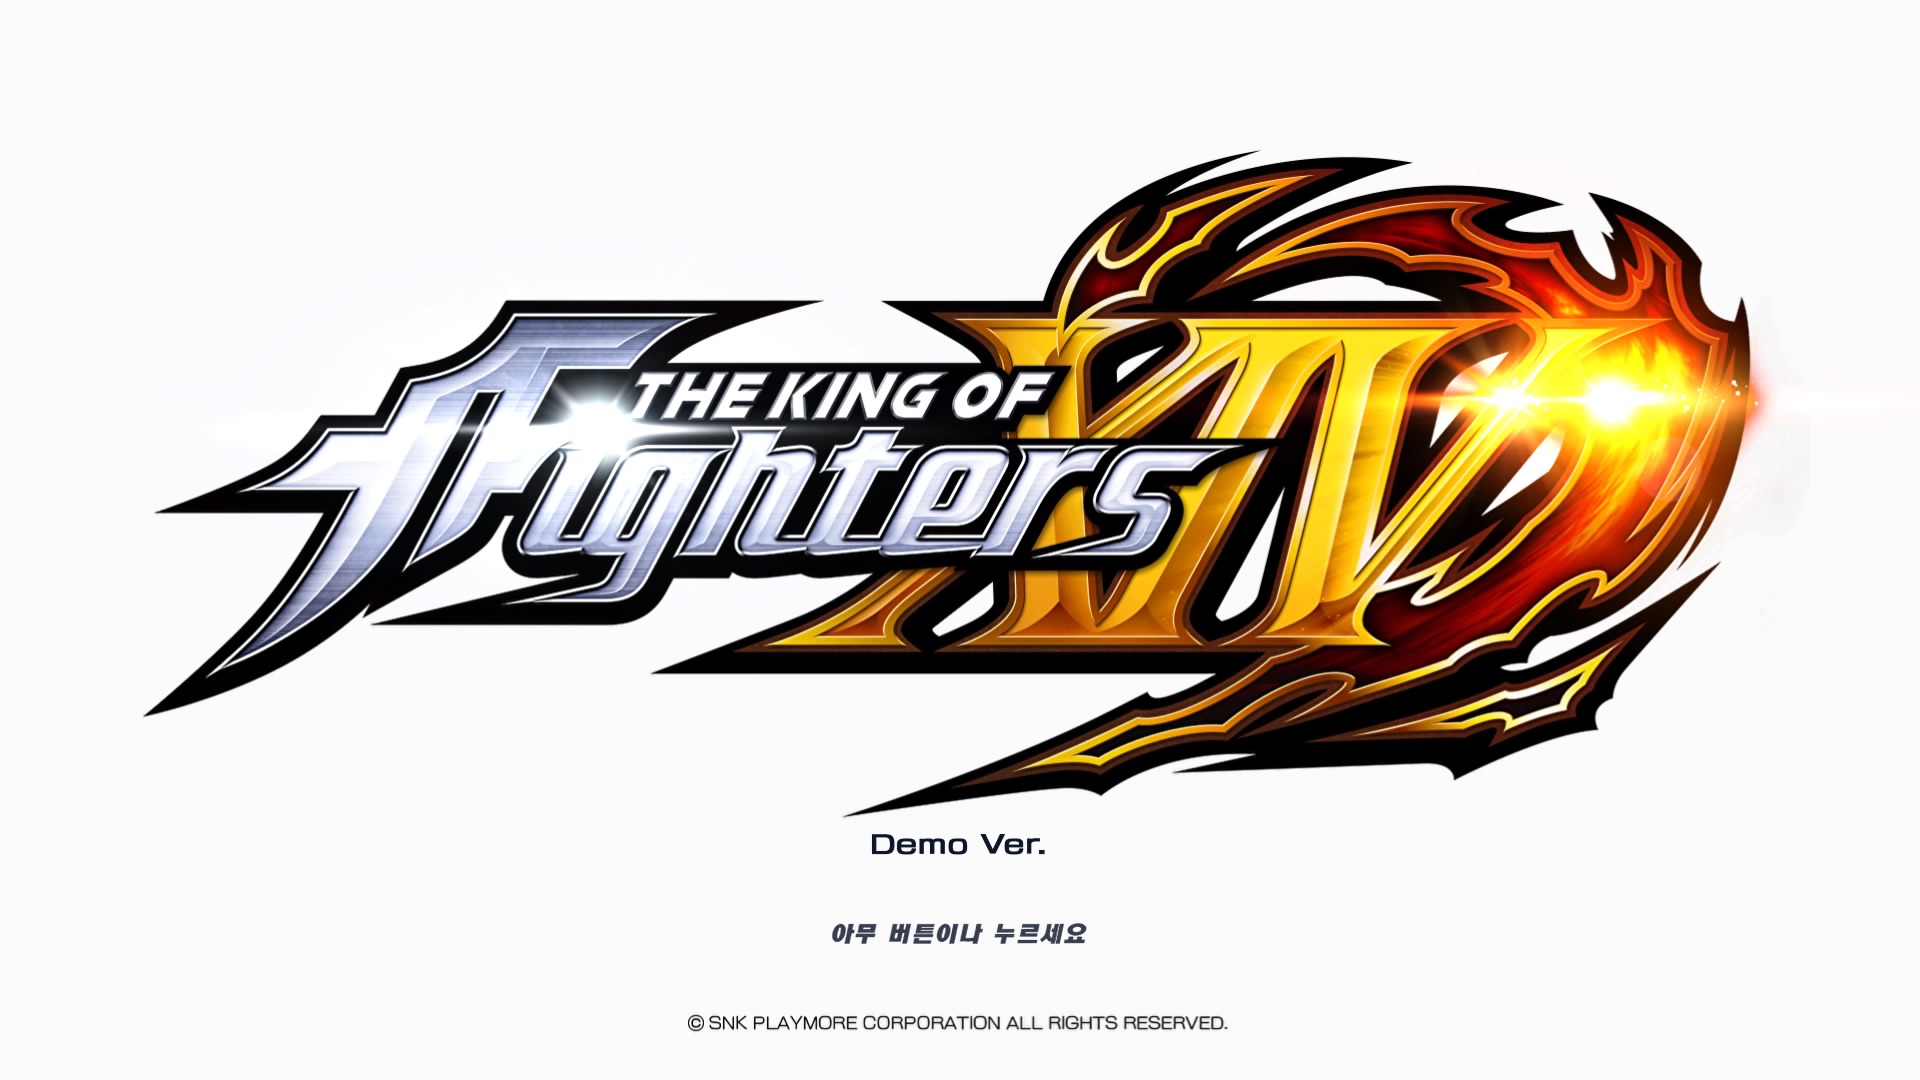 THE KING OF FIGHTERS XIV Demo Ver__20160720225714.jpg